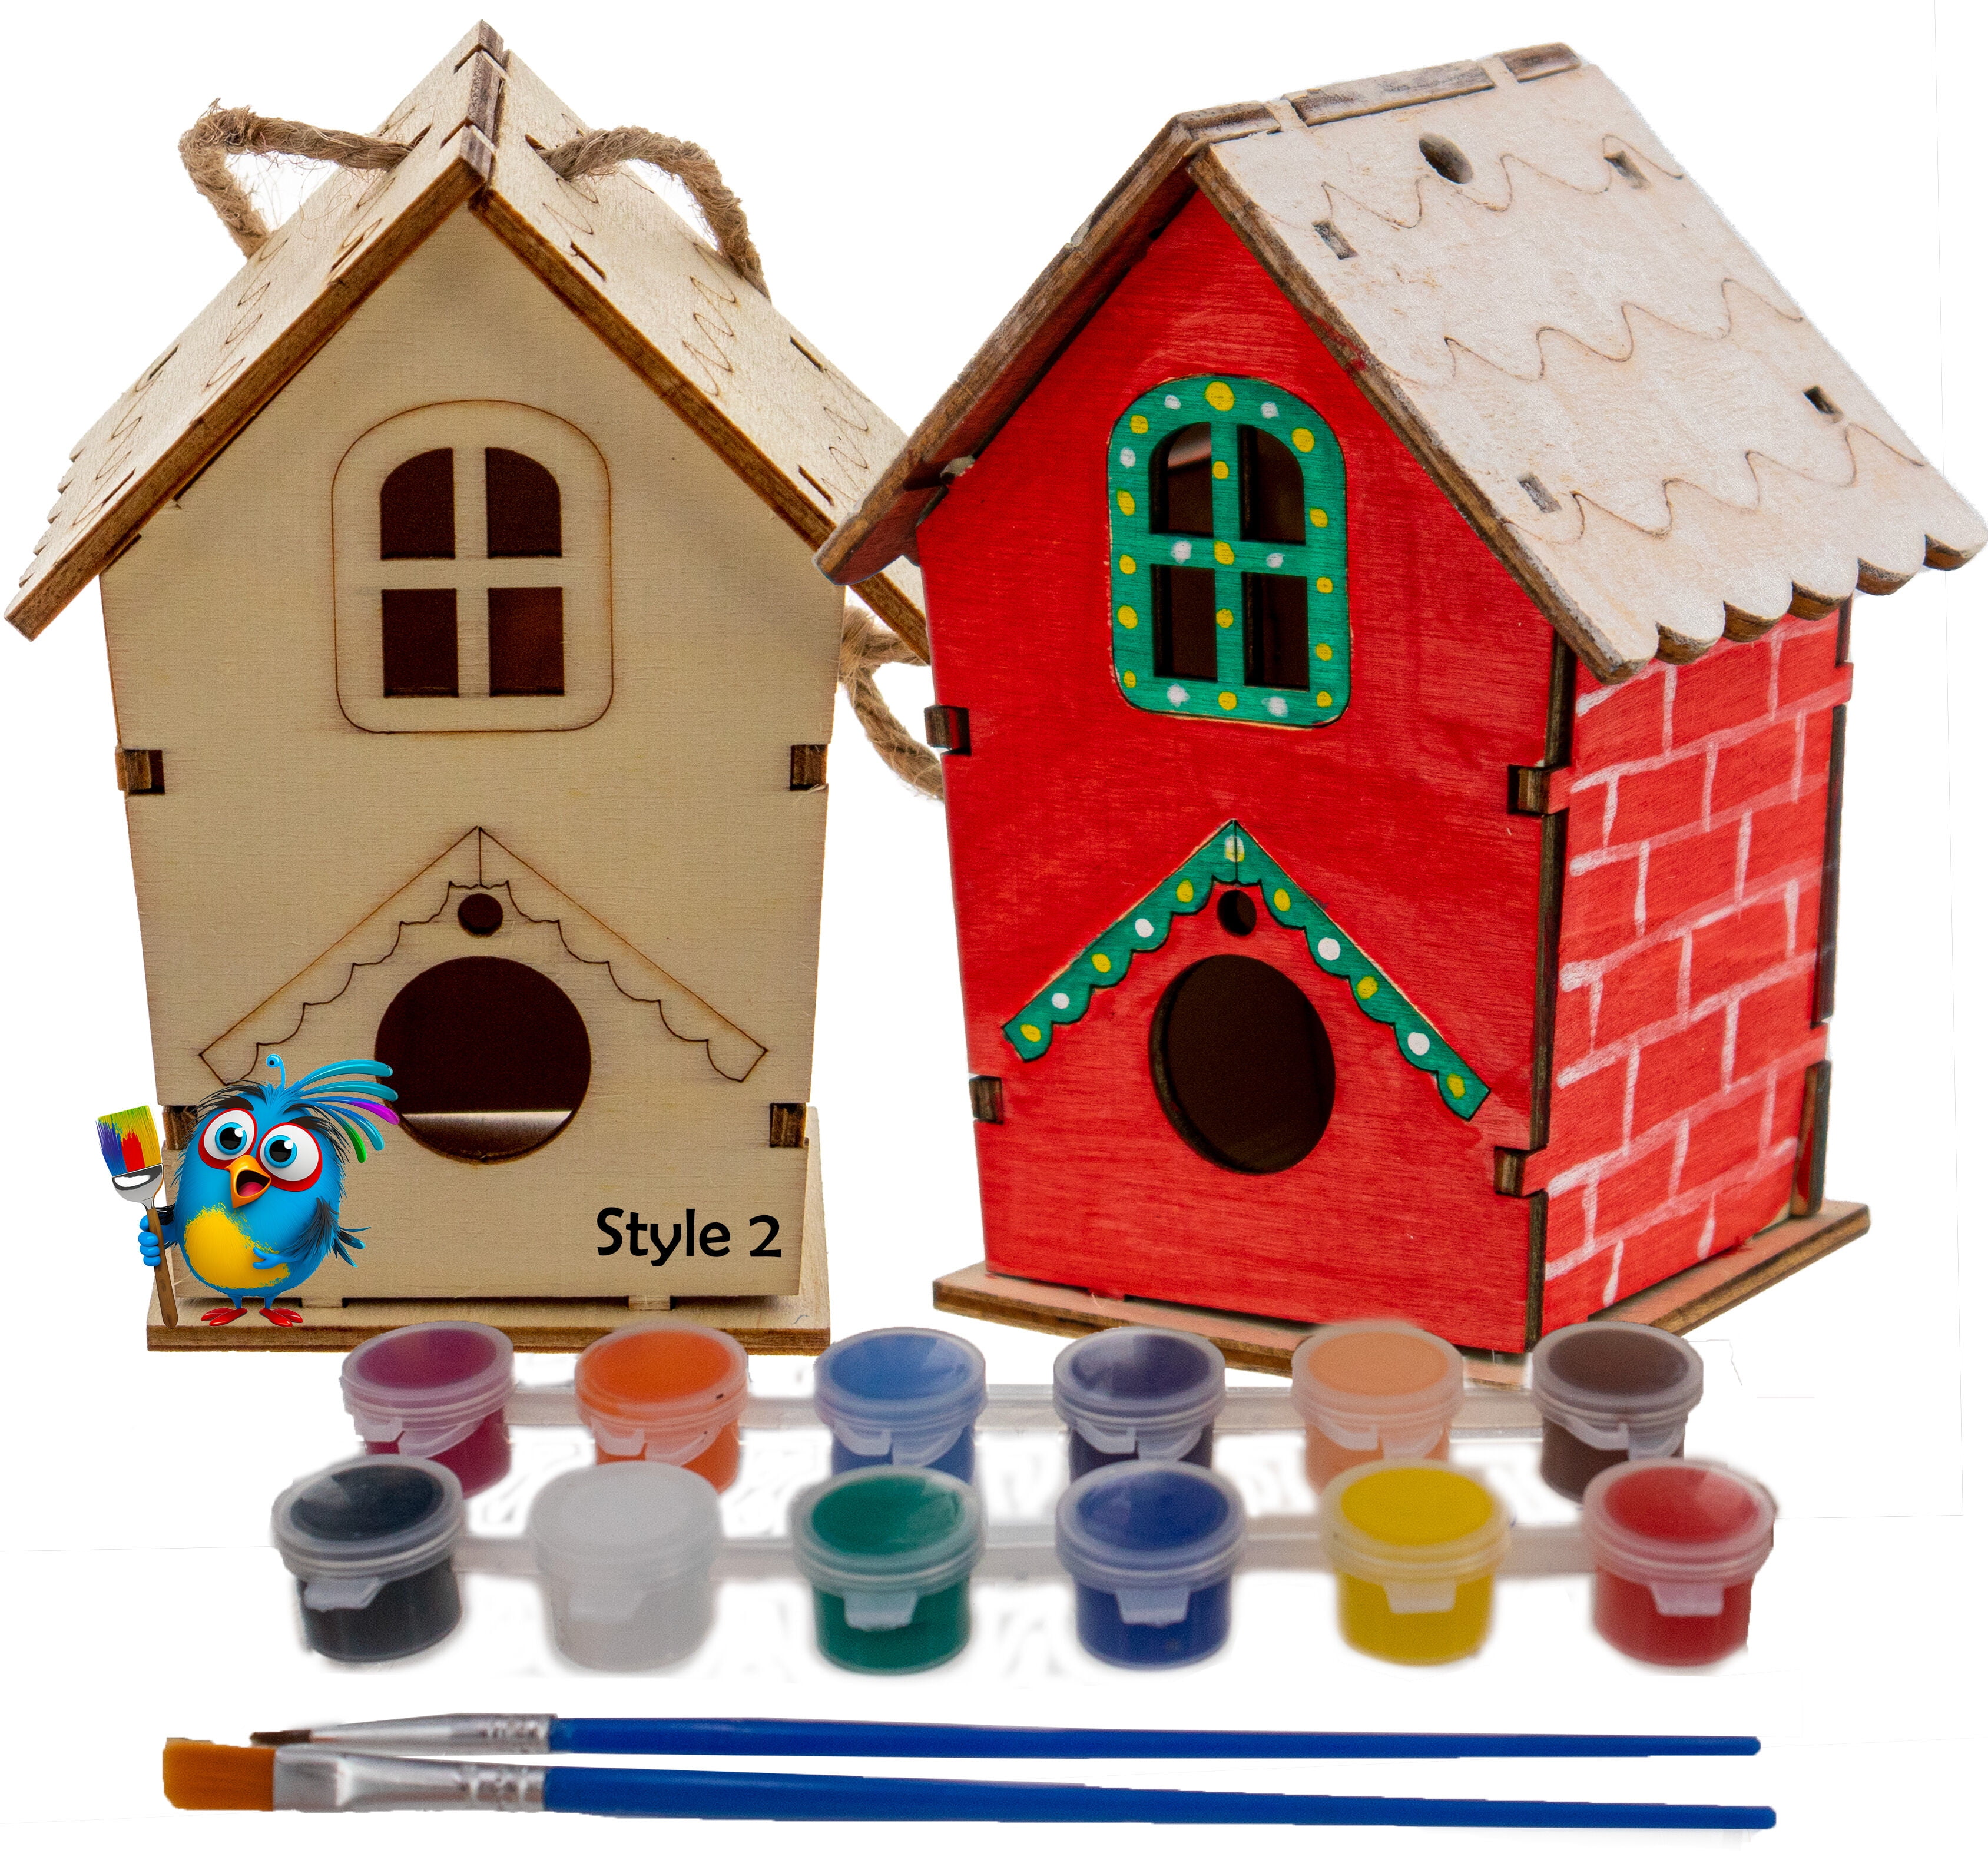 Orrhomi Crafts for Kids Ages 4-8, Large Bird House Kit, 4-Pack DIY Wooden Birdhouses for Children to Build and Paint 36 Paints 4 Glues 4 Brushs Arts